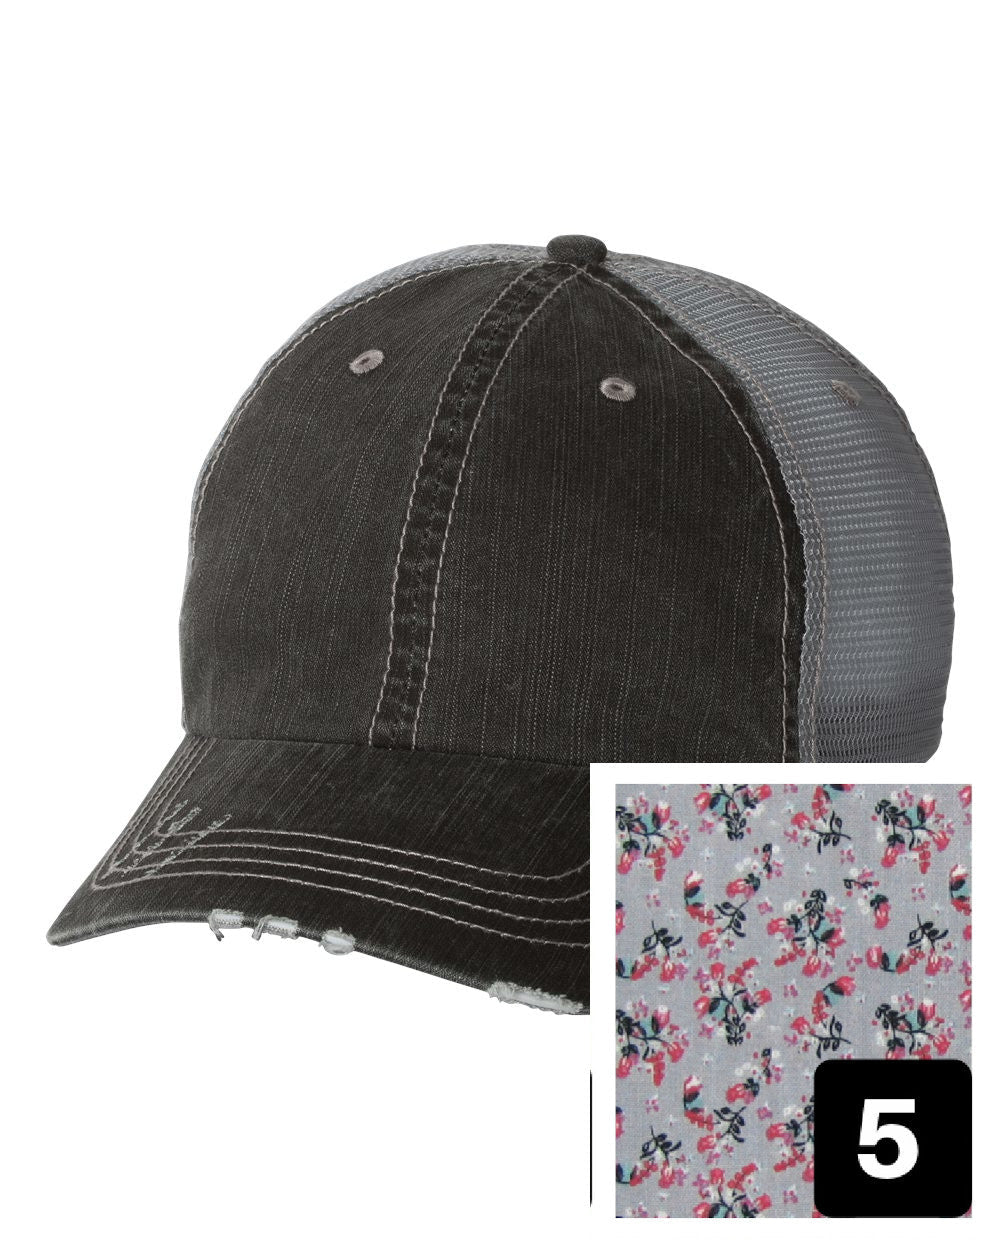 gray distressed trucker hat with purple and pink floral fabric state of Missouri